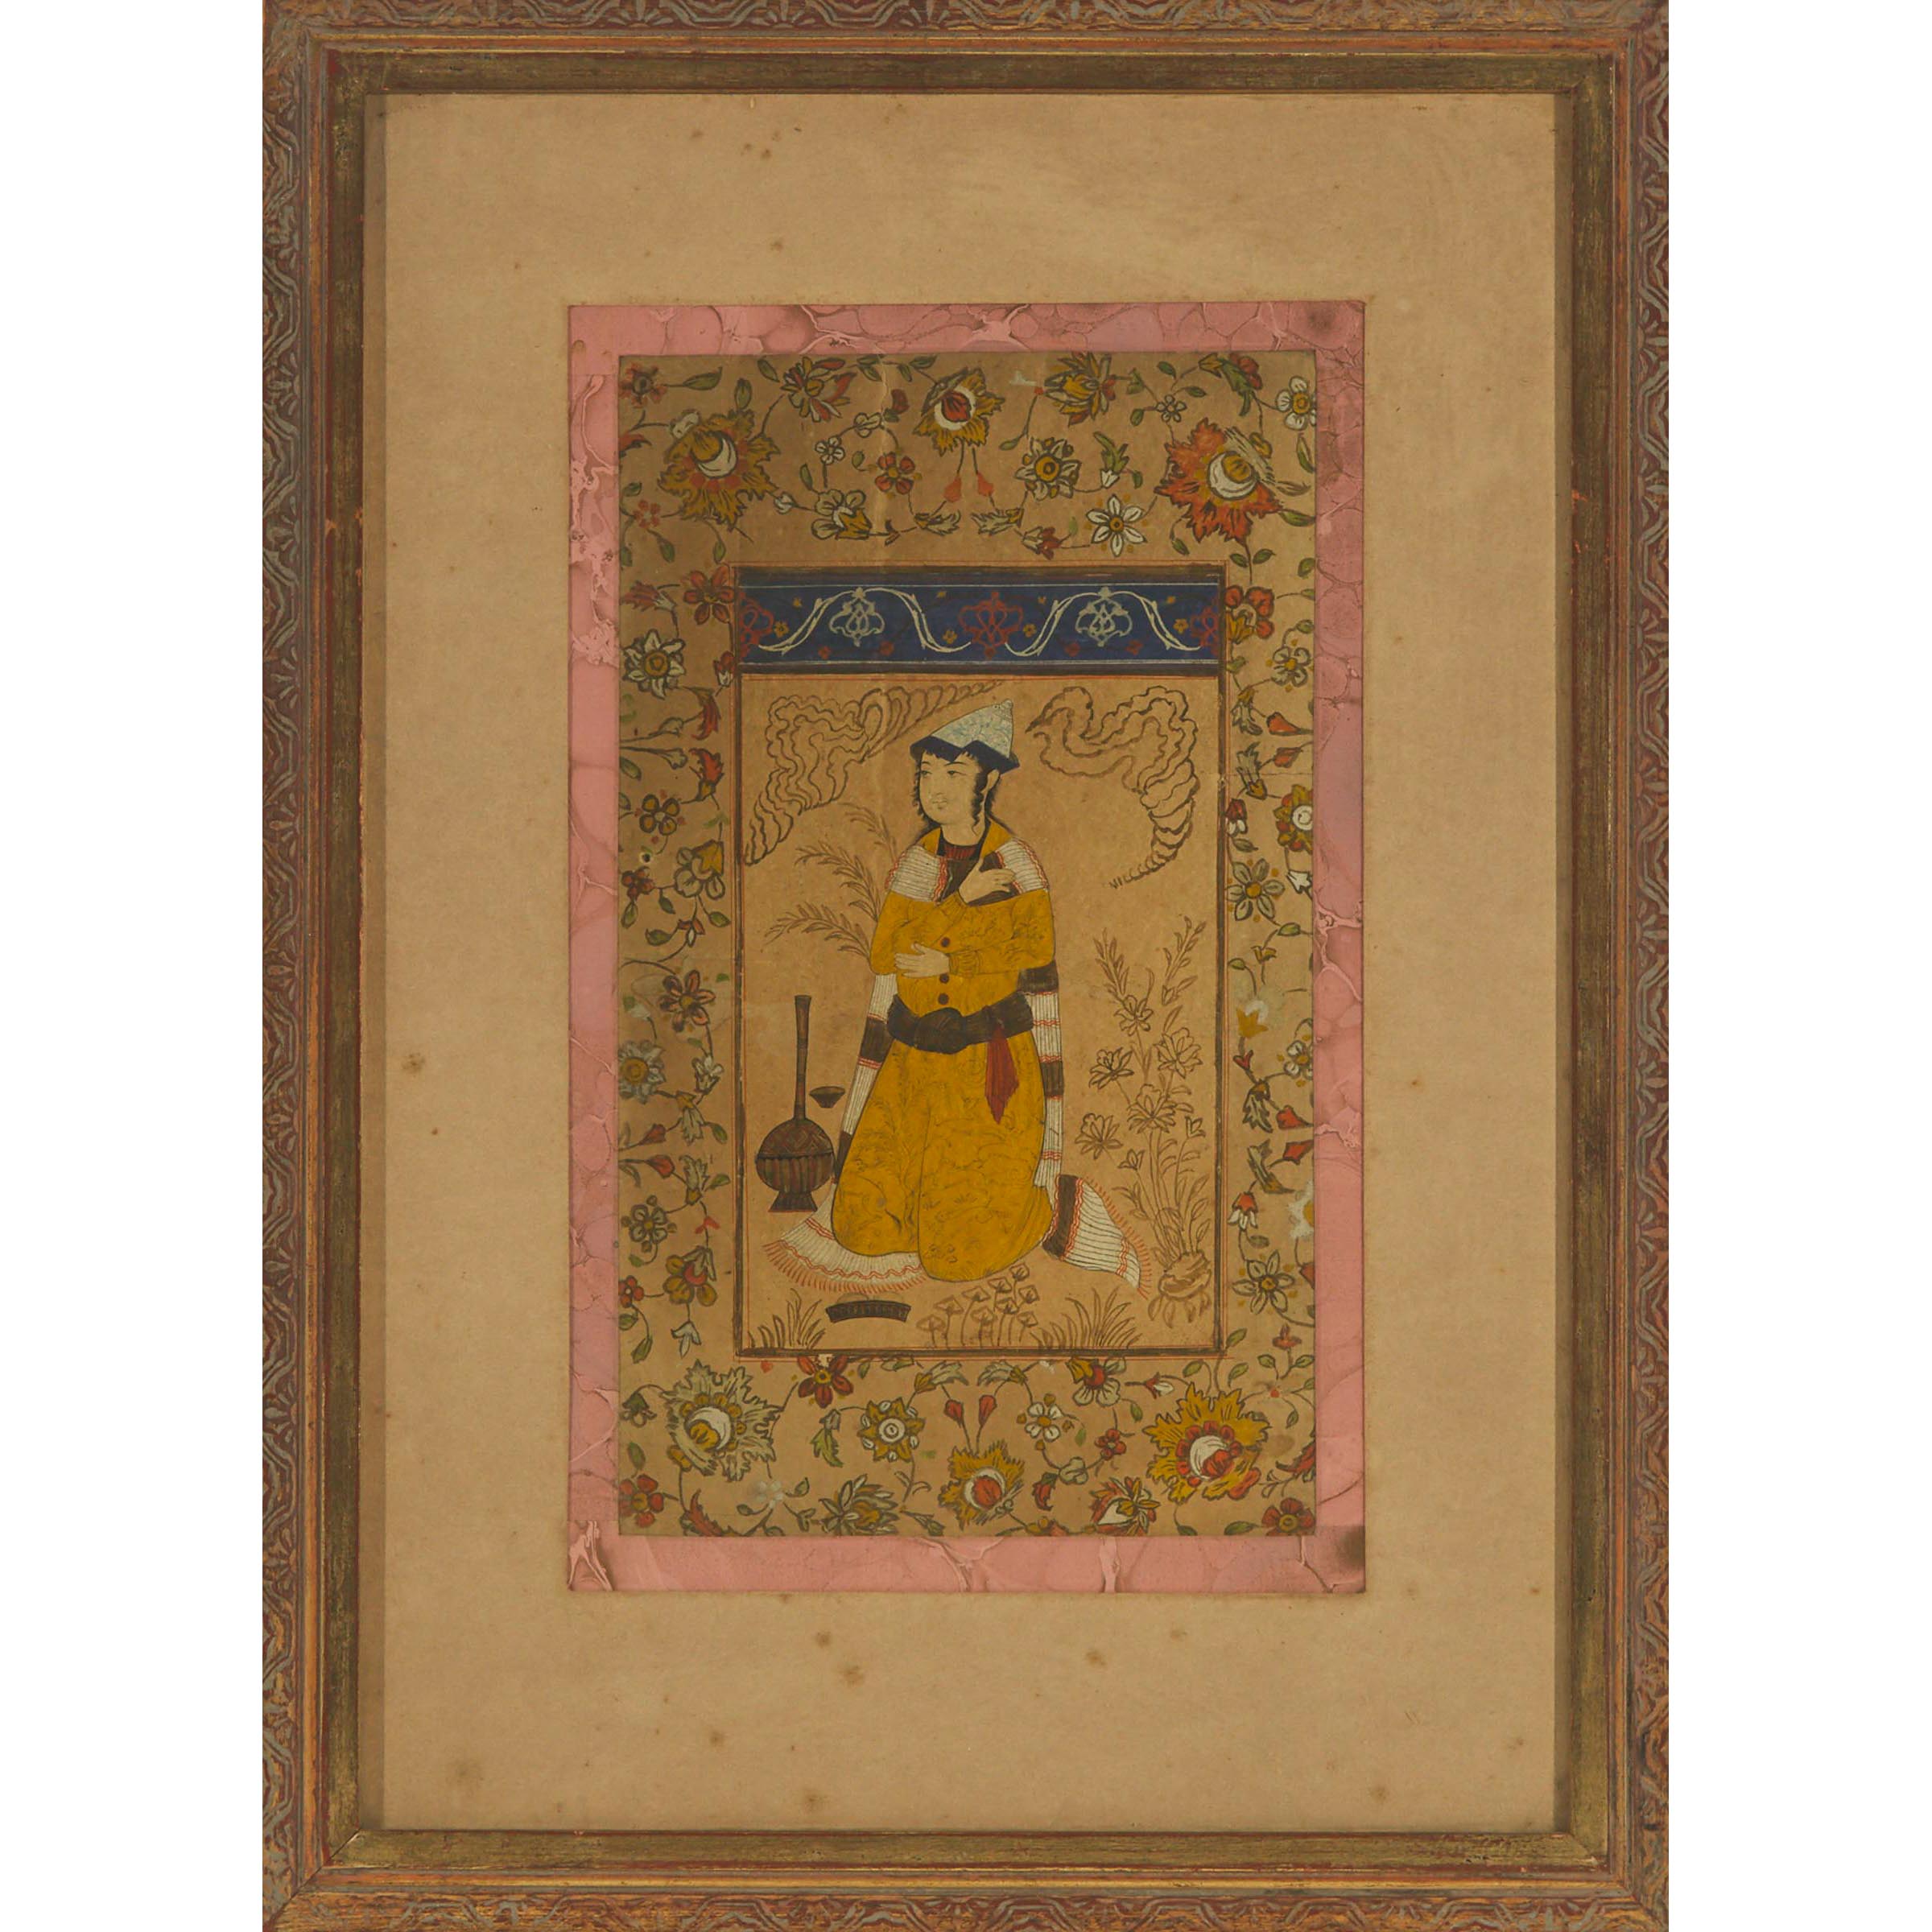 A Persian Painting of a Young Man, 19th Century or Earlier